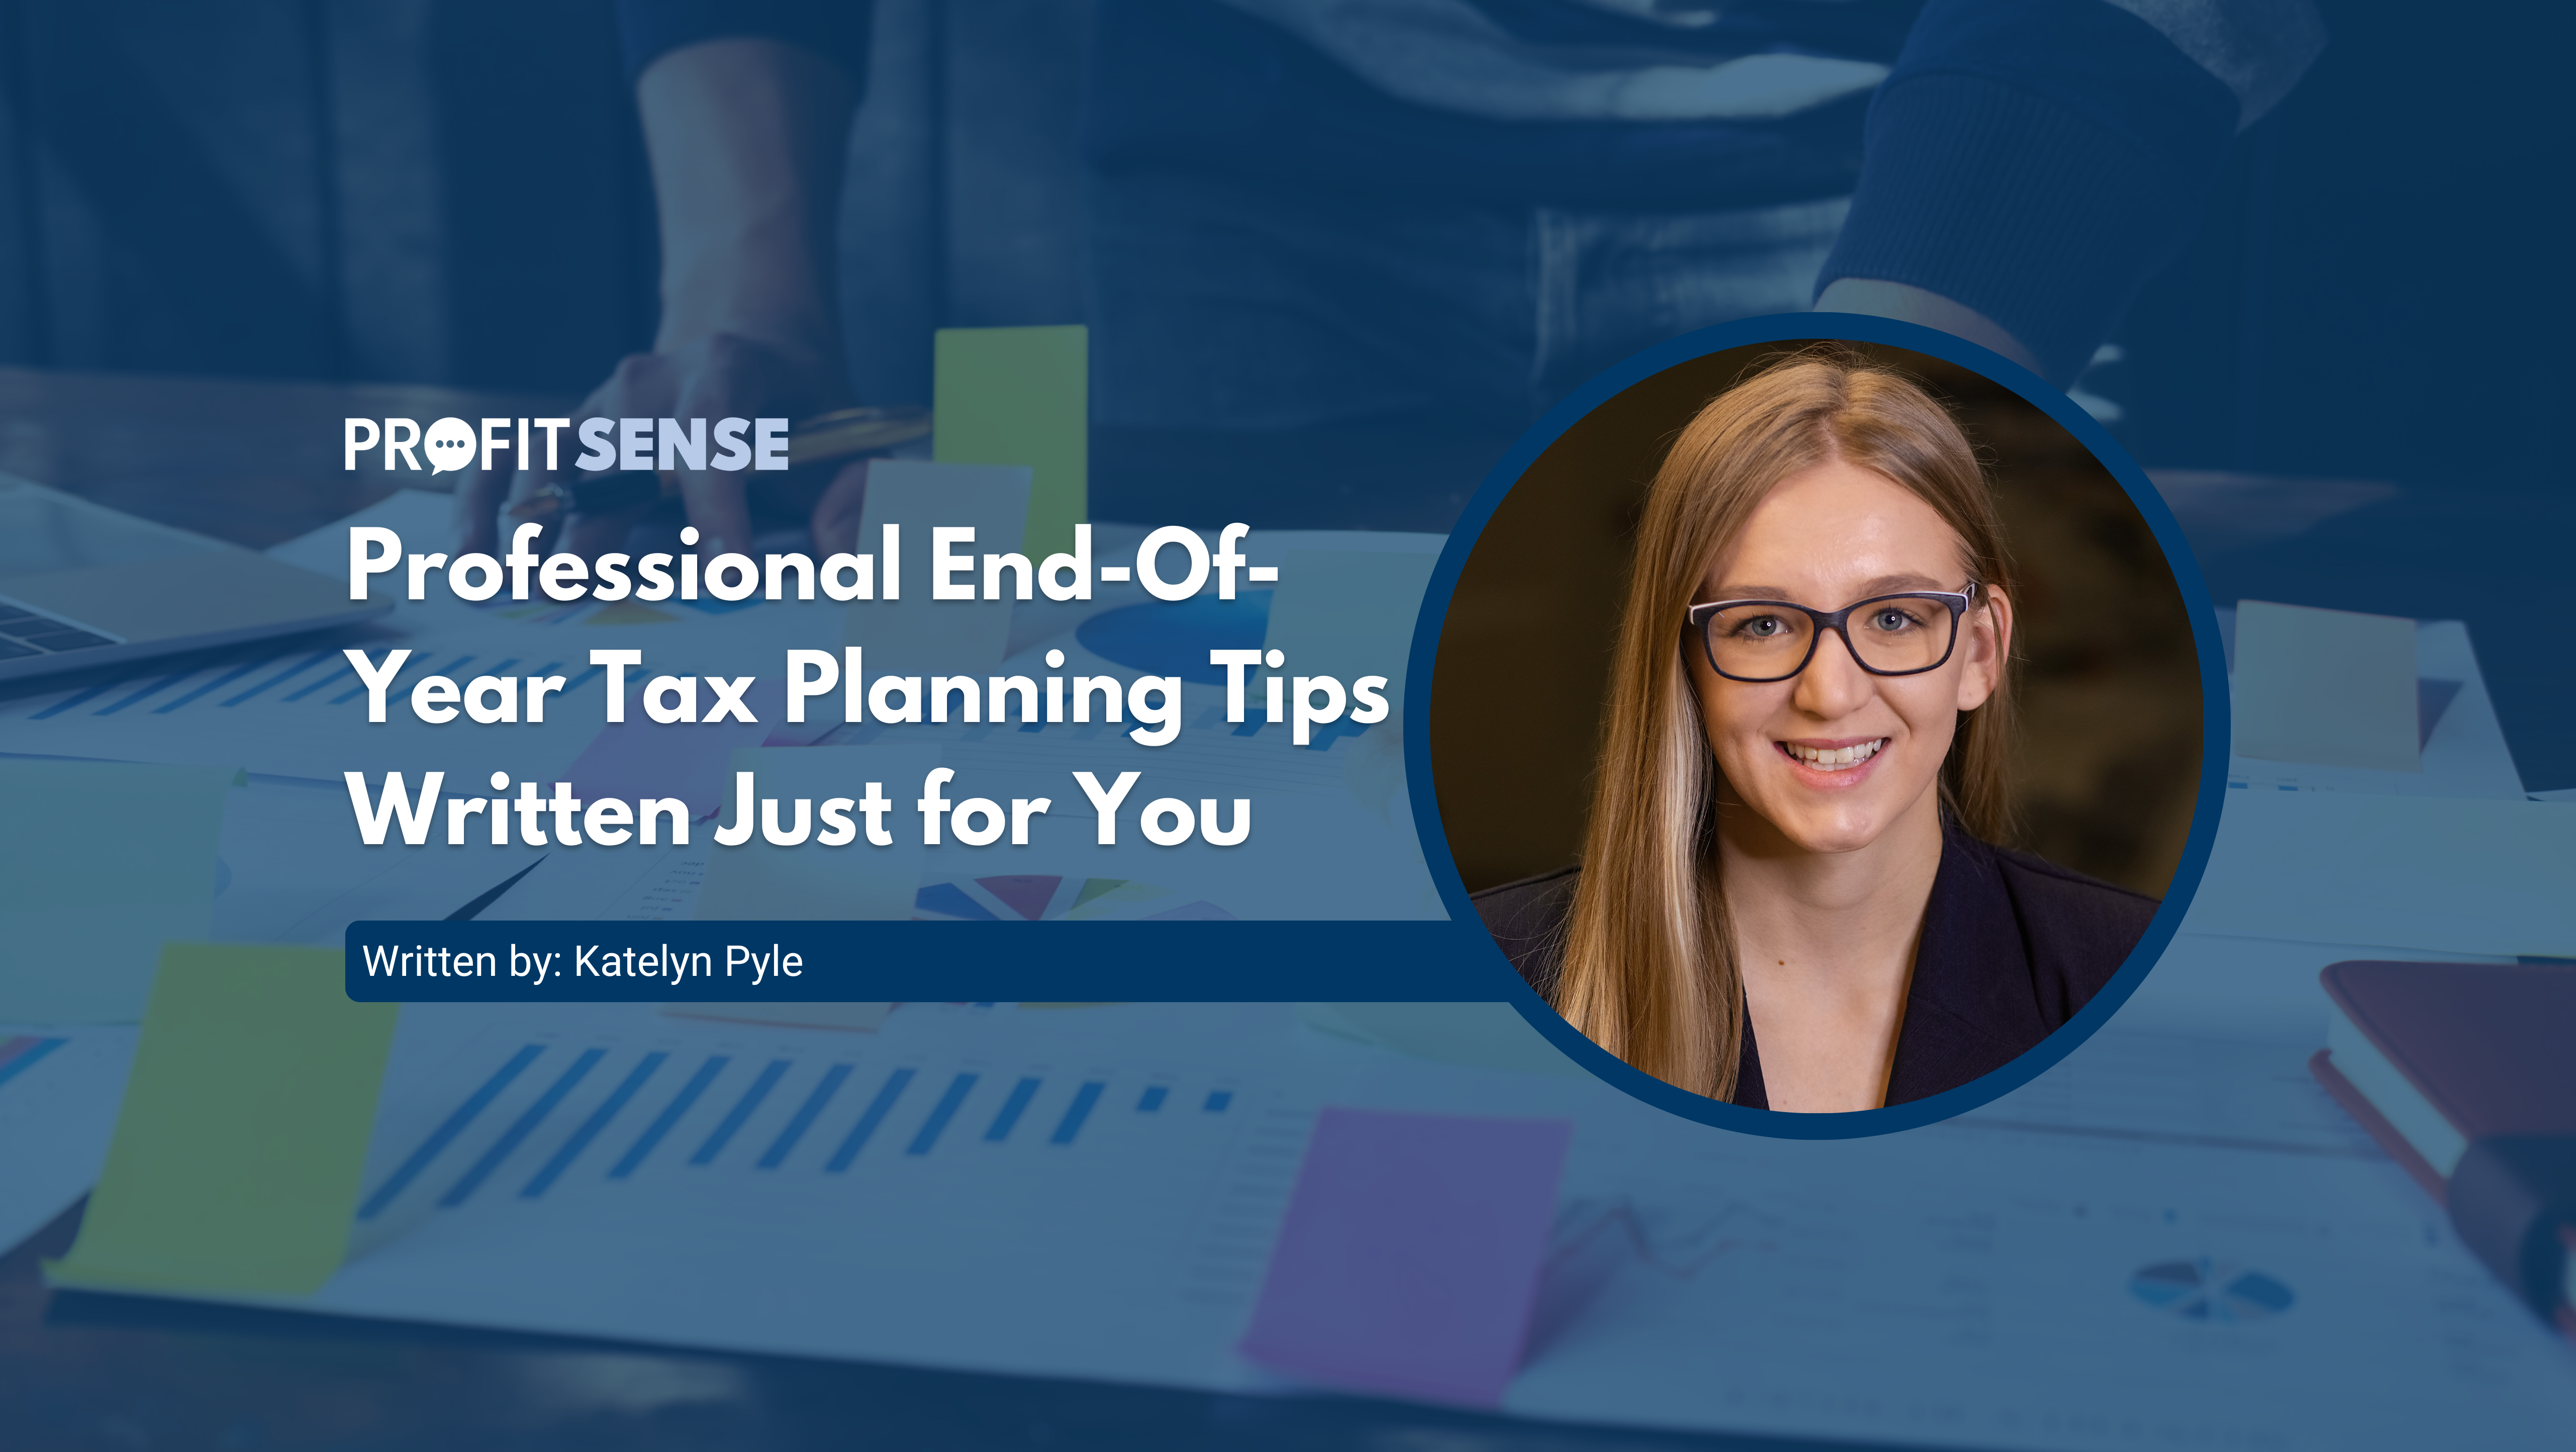 Professional End-of-Year Tax Planning Tips Written Just for You